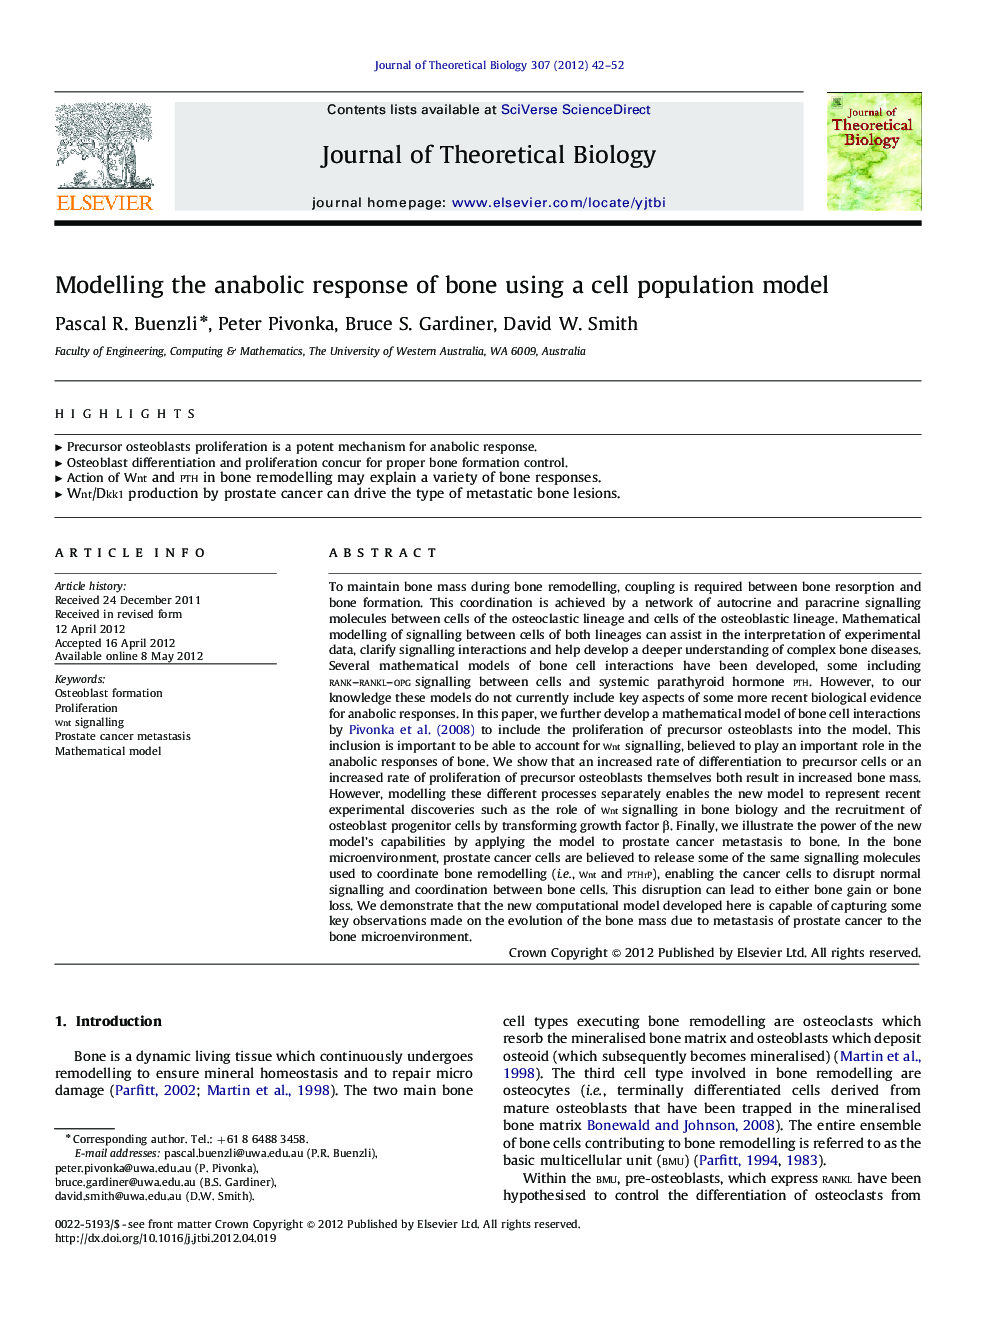 Modelling the anabolic response of bone using a cell population model